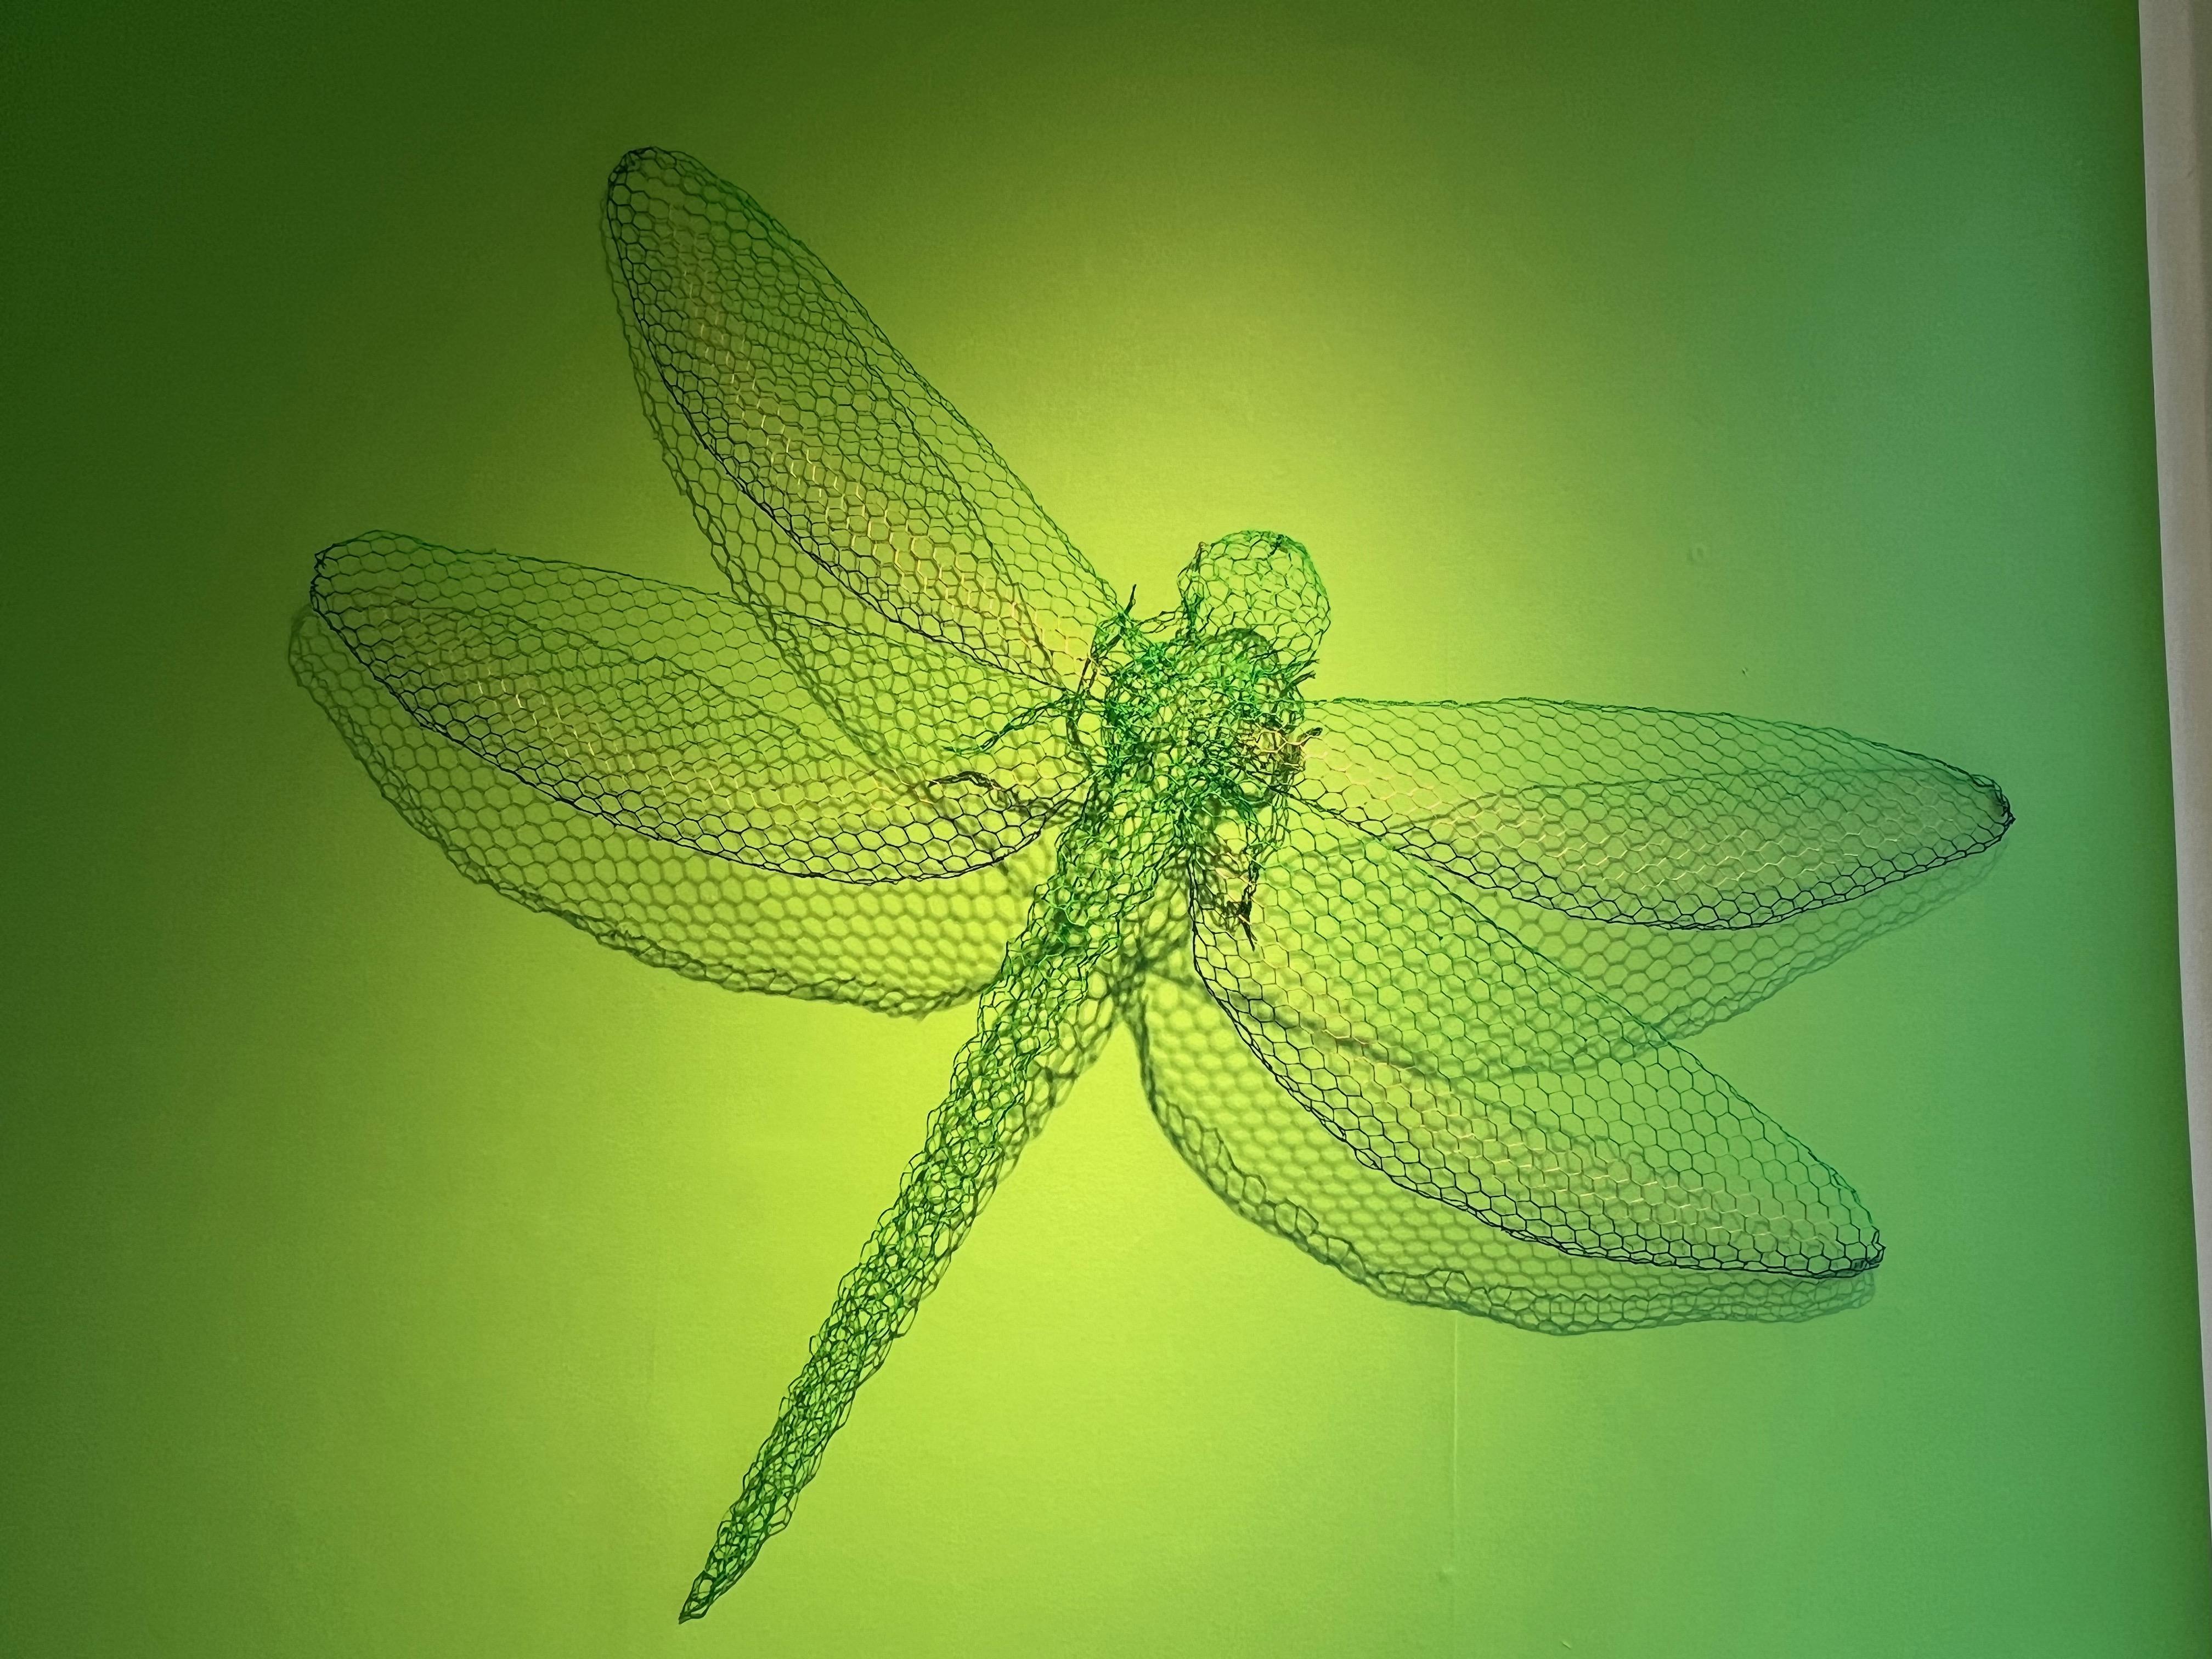 Hand-formed wire sculpture of a shimmering dragonfly, finished in bright green blue and gold enamel paint.